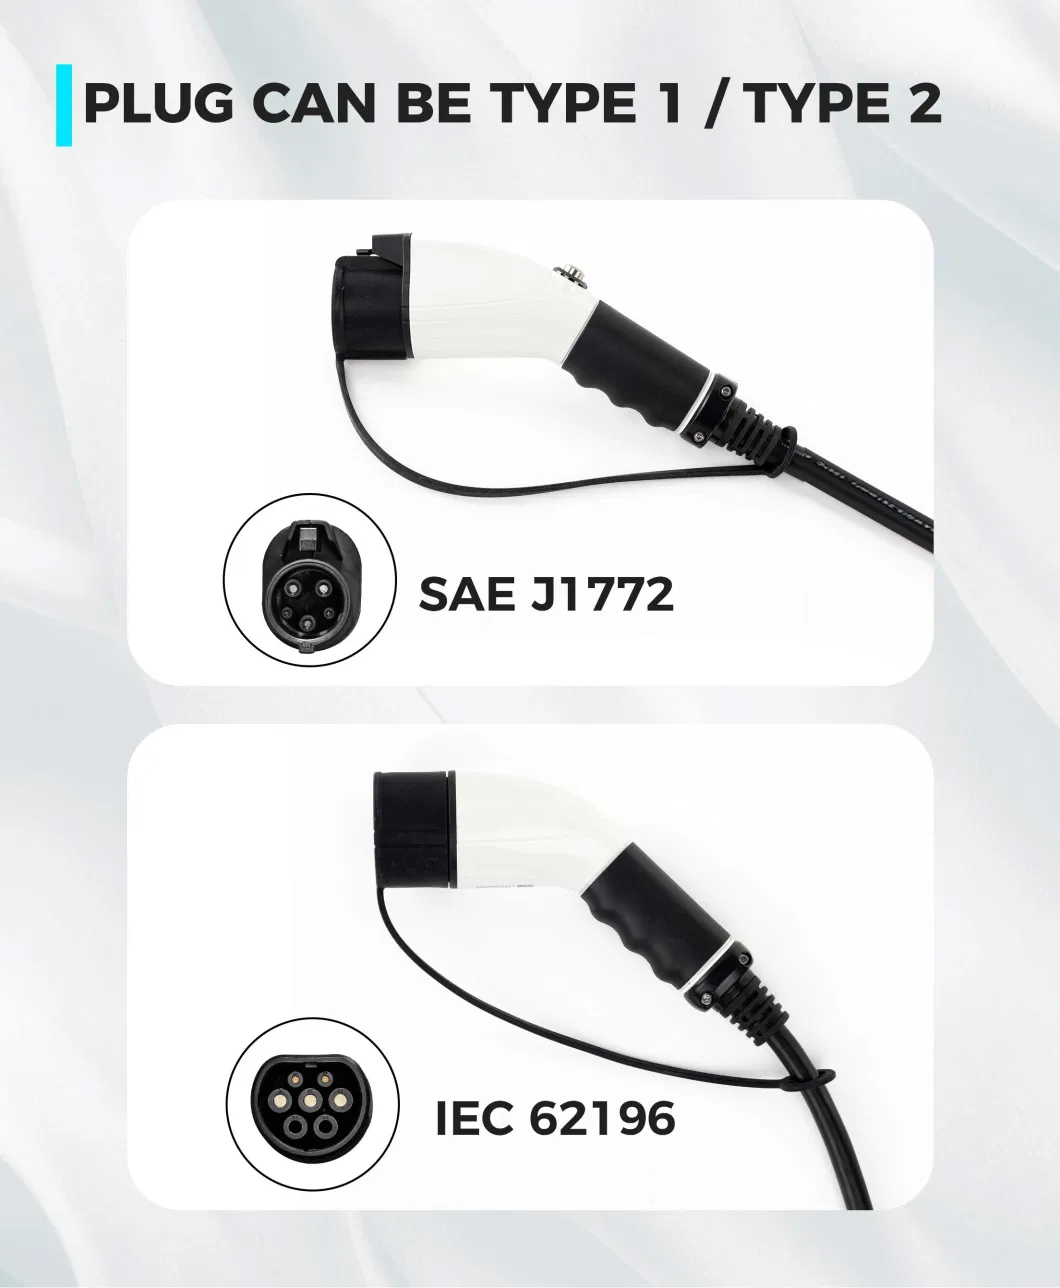 Wholesale EV Charger Supplier From China Producing 3.6kw 7.4kw 11kw 22kw 32A IP65 AC Home Charger Electric Car Charging Equipment with CE Certificate